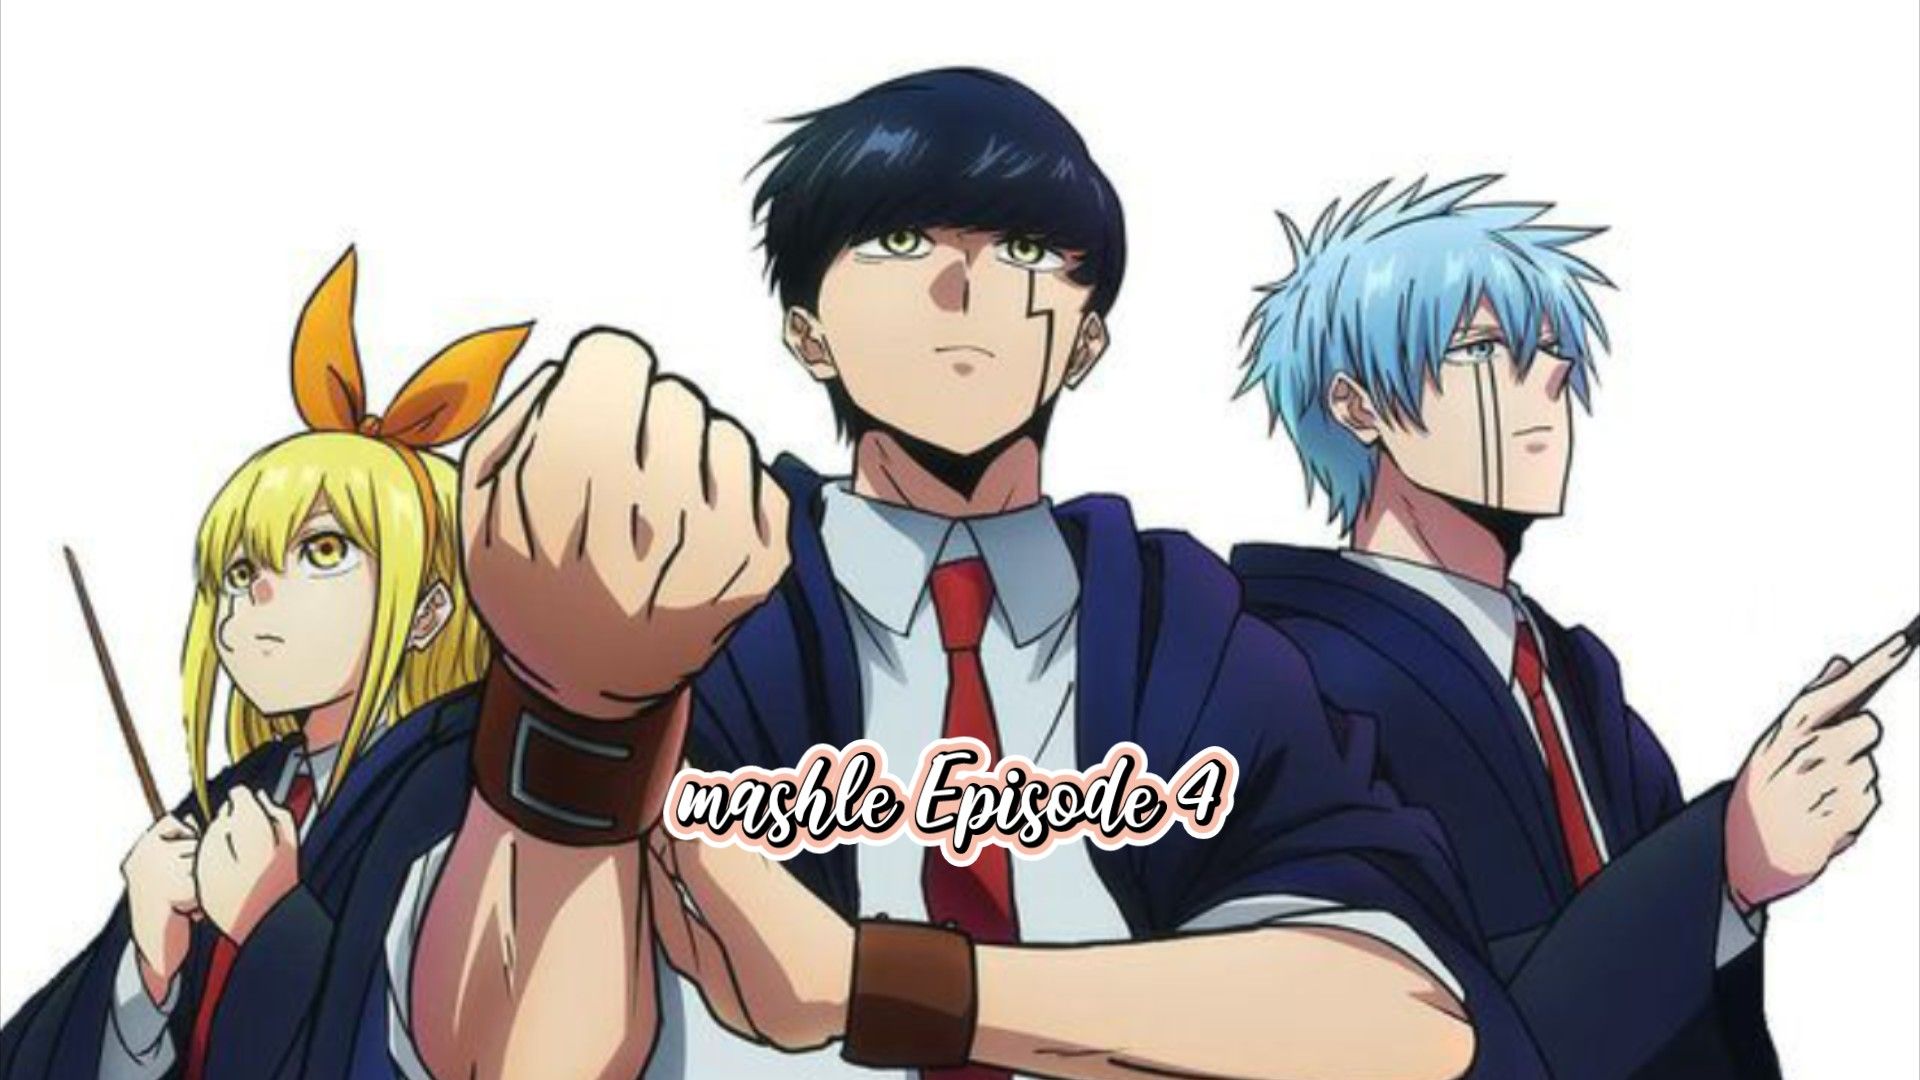 Medialink acquires Mashle: Magic and Muscles anime this April